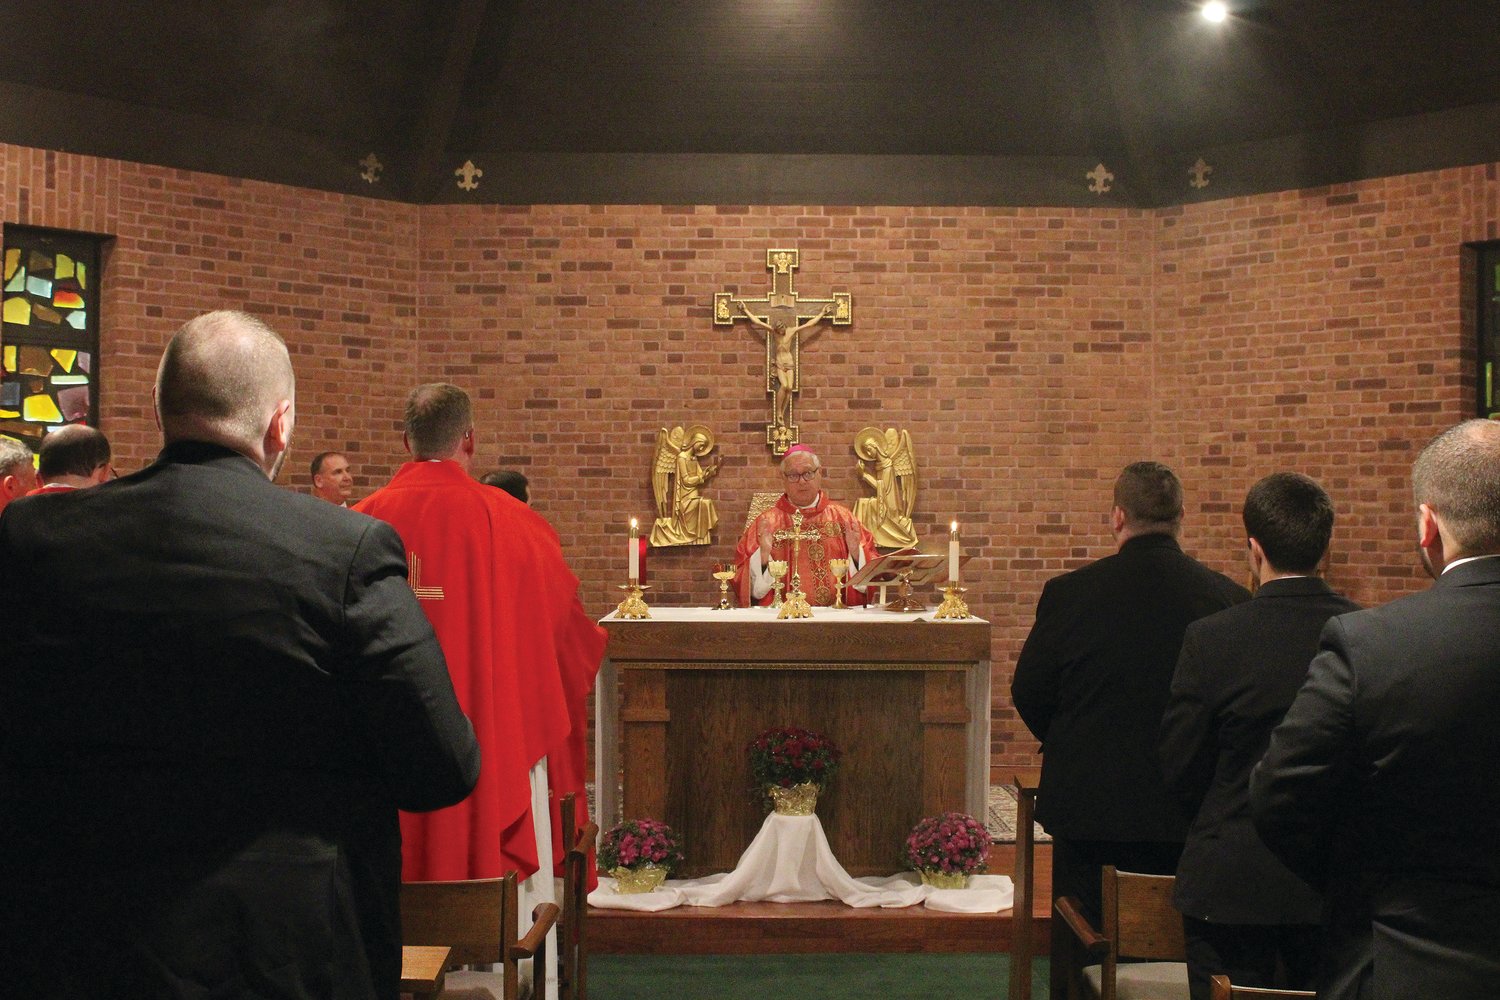 Bishop Thomas J. Tobin served as principal celebrant during the opening Mass at Our Lady of Providence Seminary, welcoming the seminarians beginning the new academic year, as well as priests from both the Diocese of Providence and other dioceses whose seminarians are in their priestly formation at OLP.